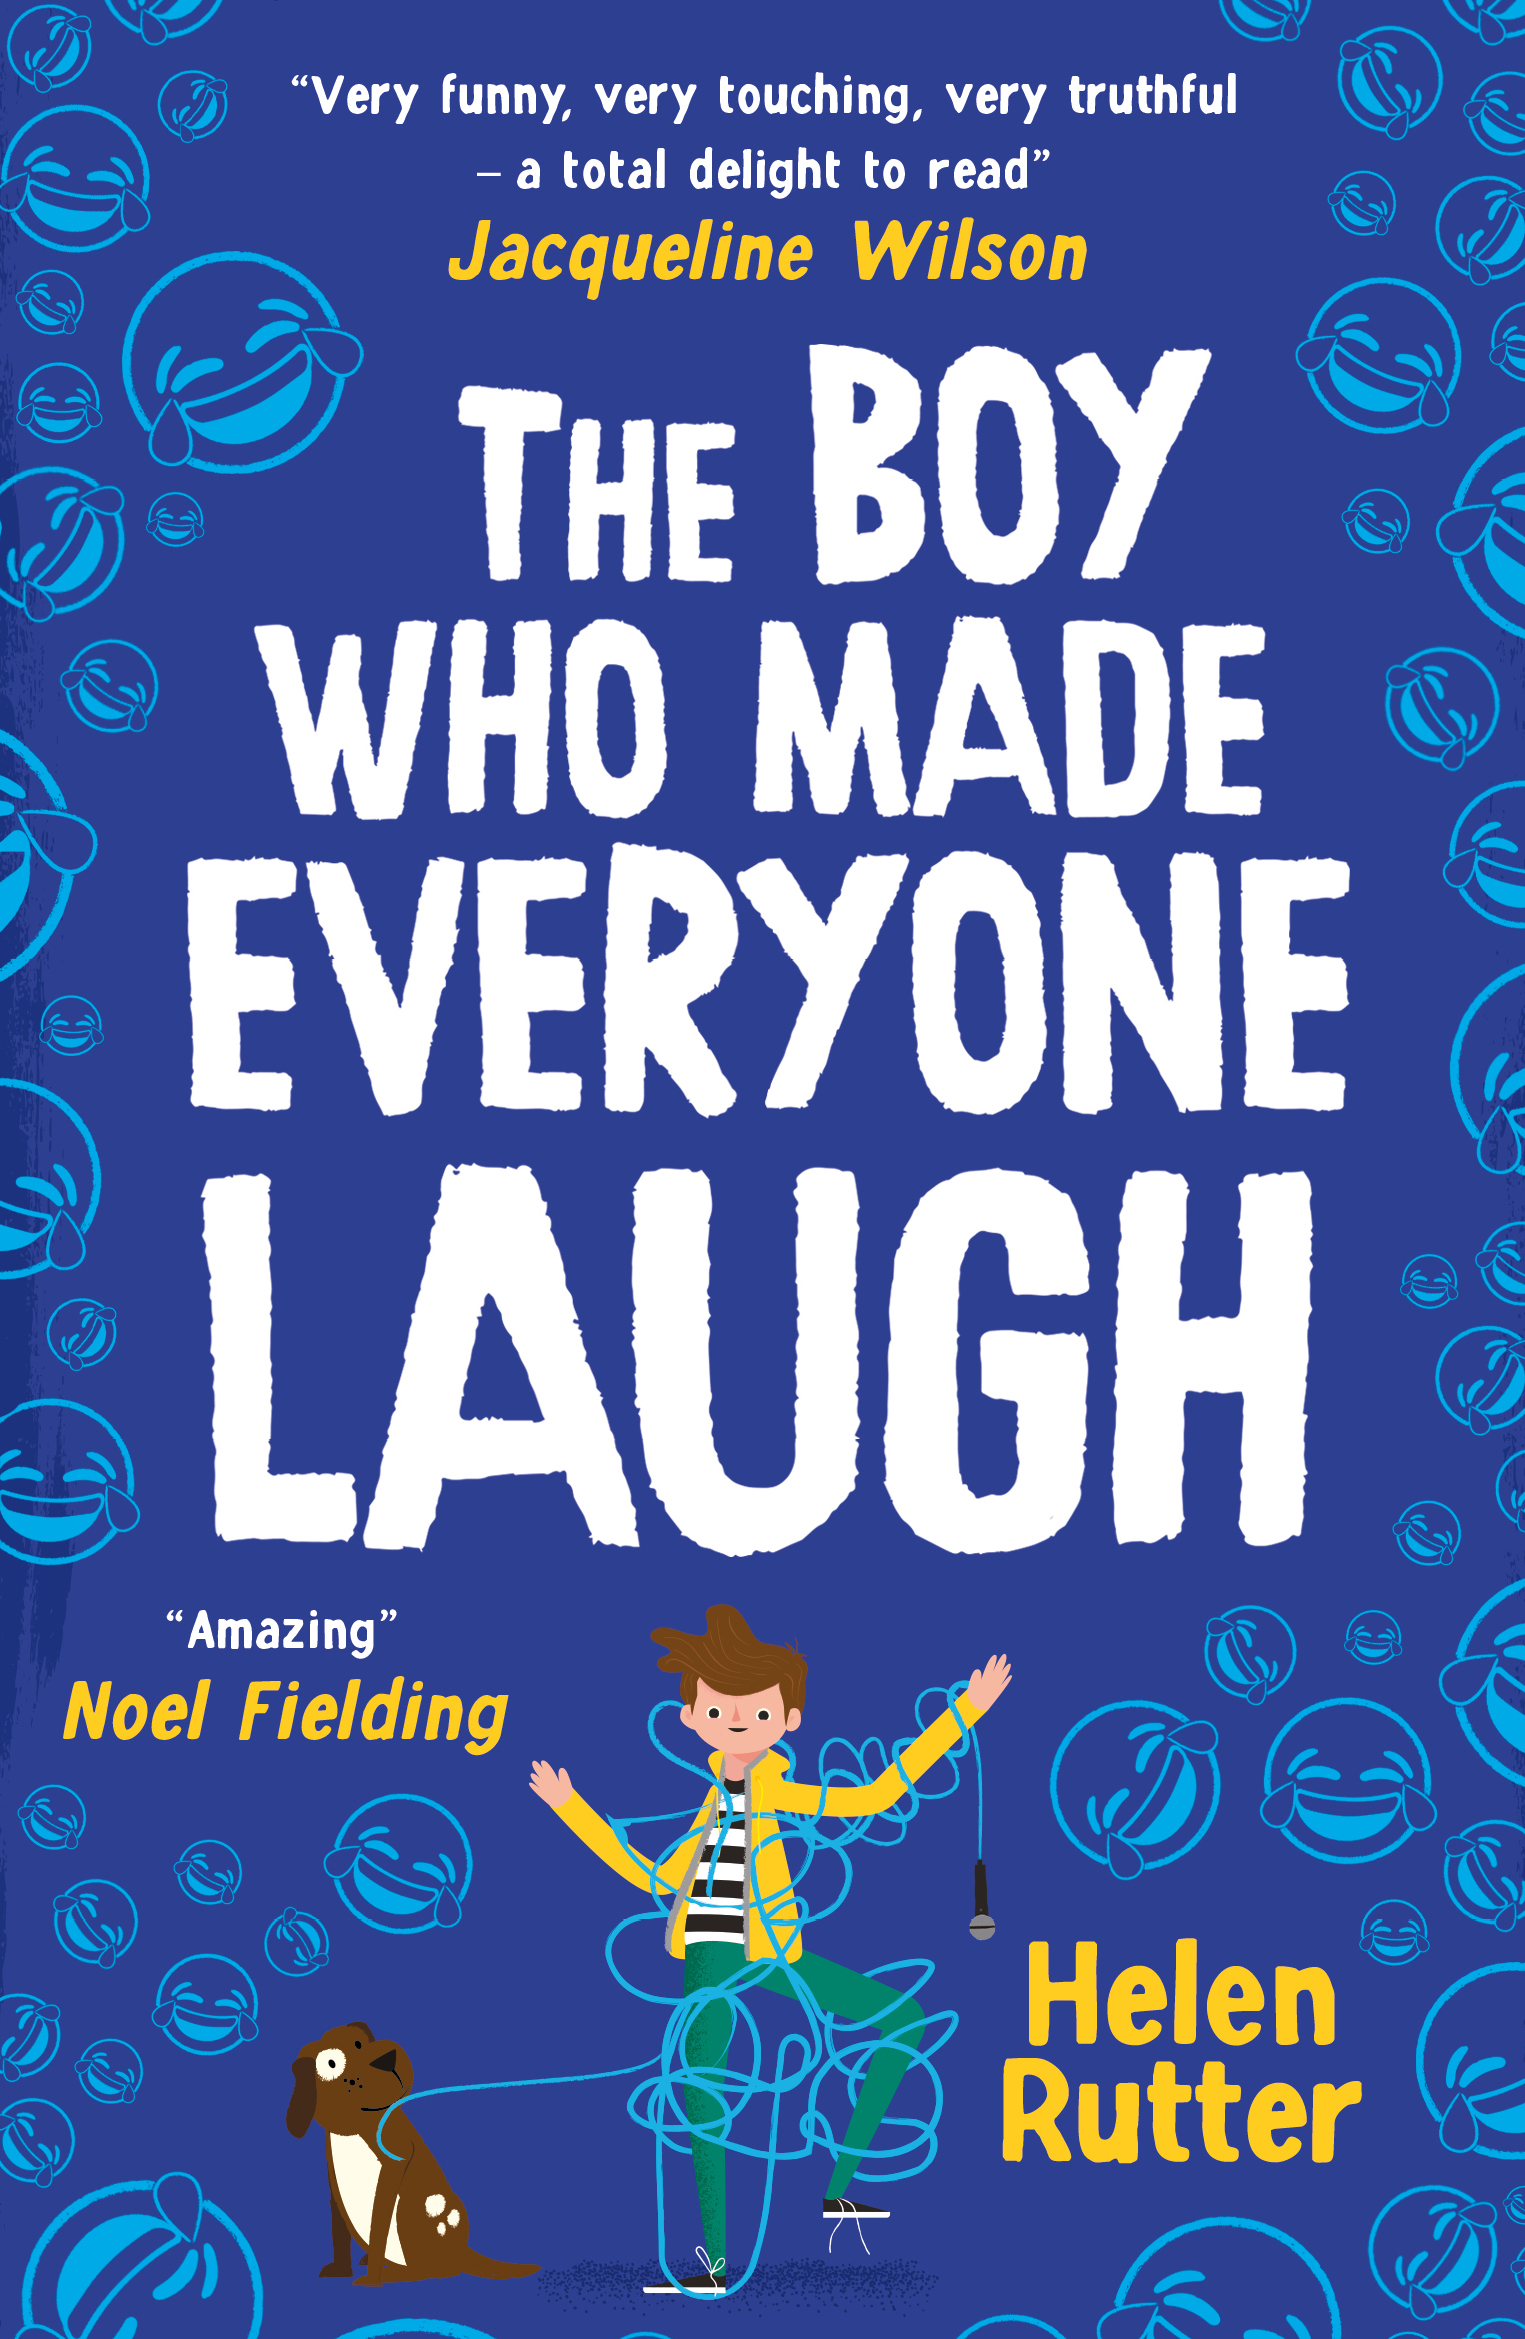 Front cover of the book 'The Boy Who Made Everyone Laugh'